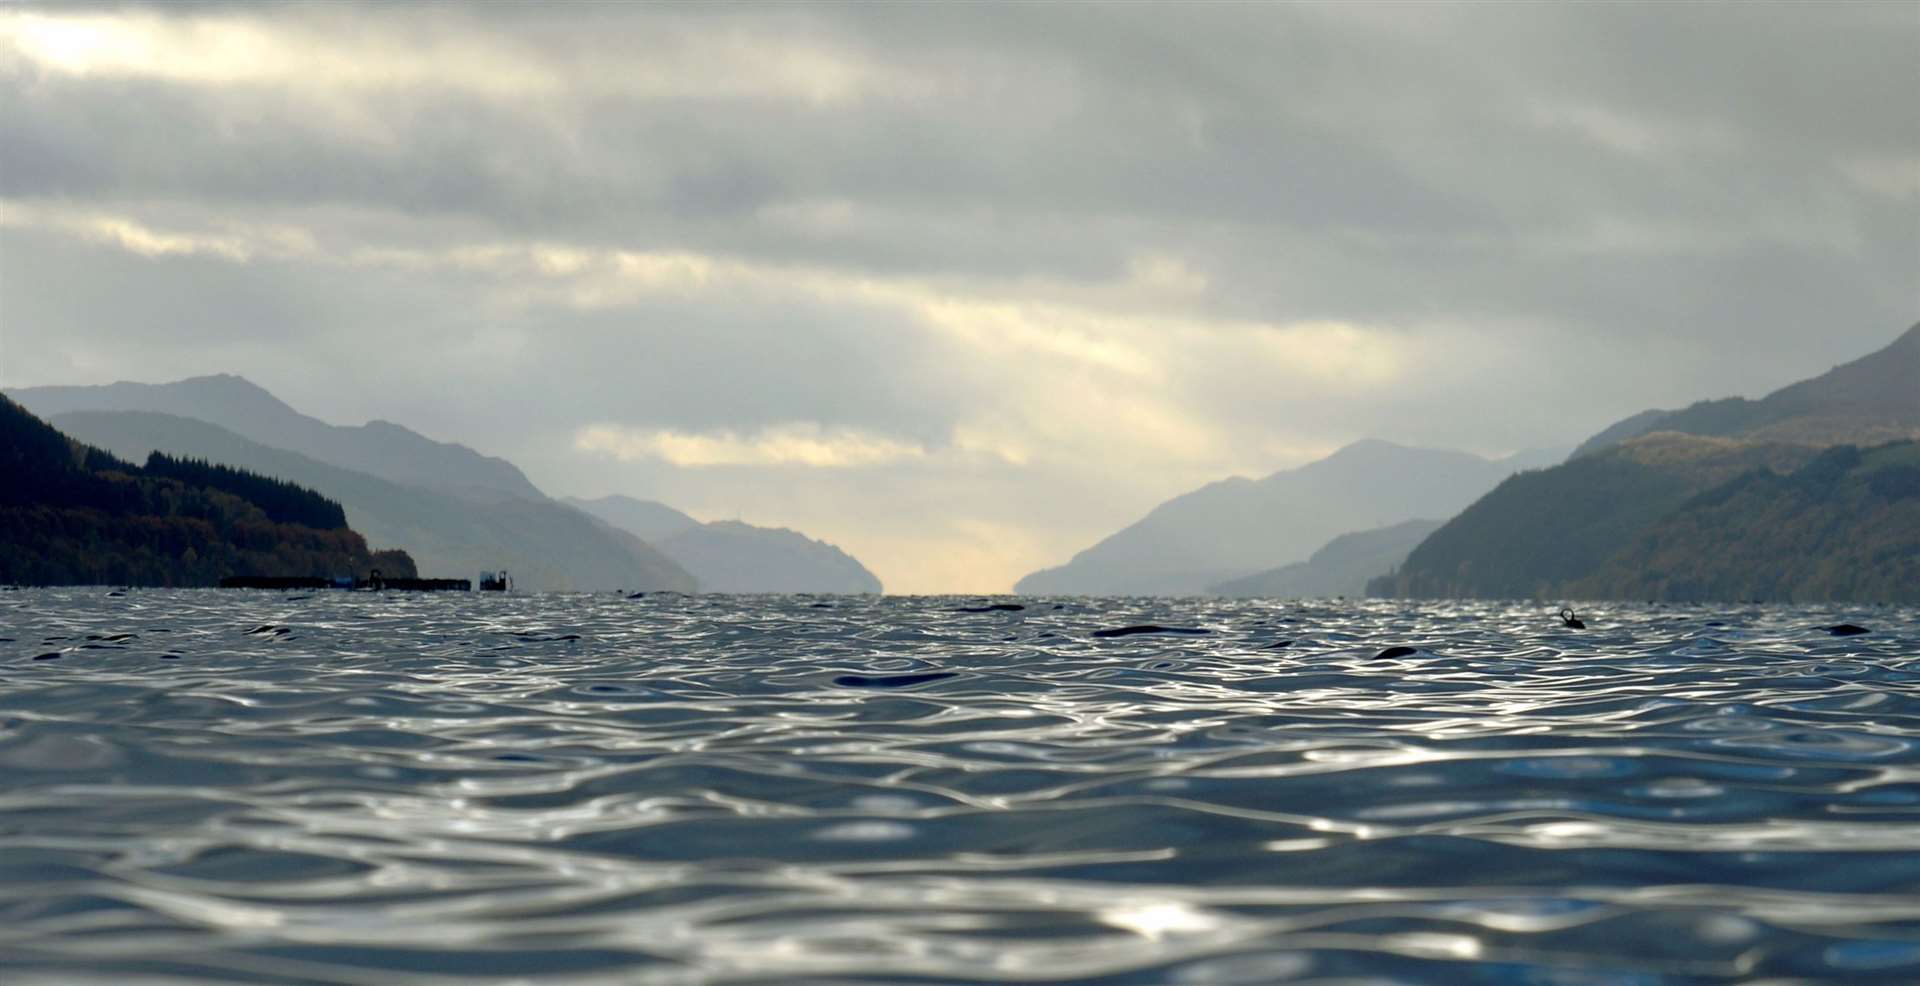 The murky waters of Loch Ness captured atmospherically from Dores beach. Picture: Gary Anthony